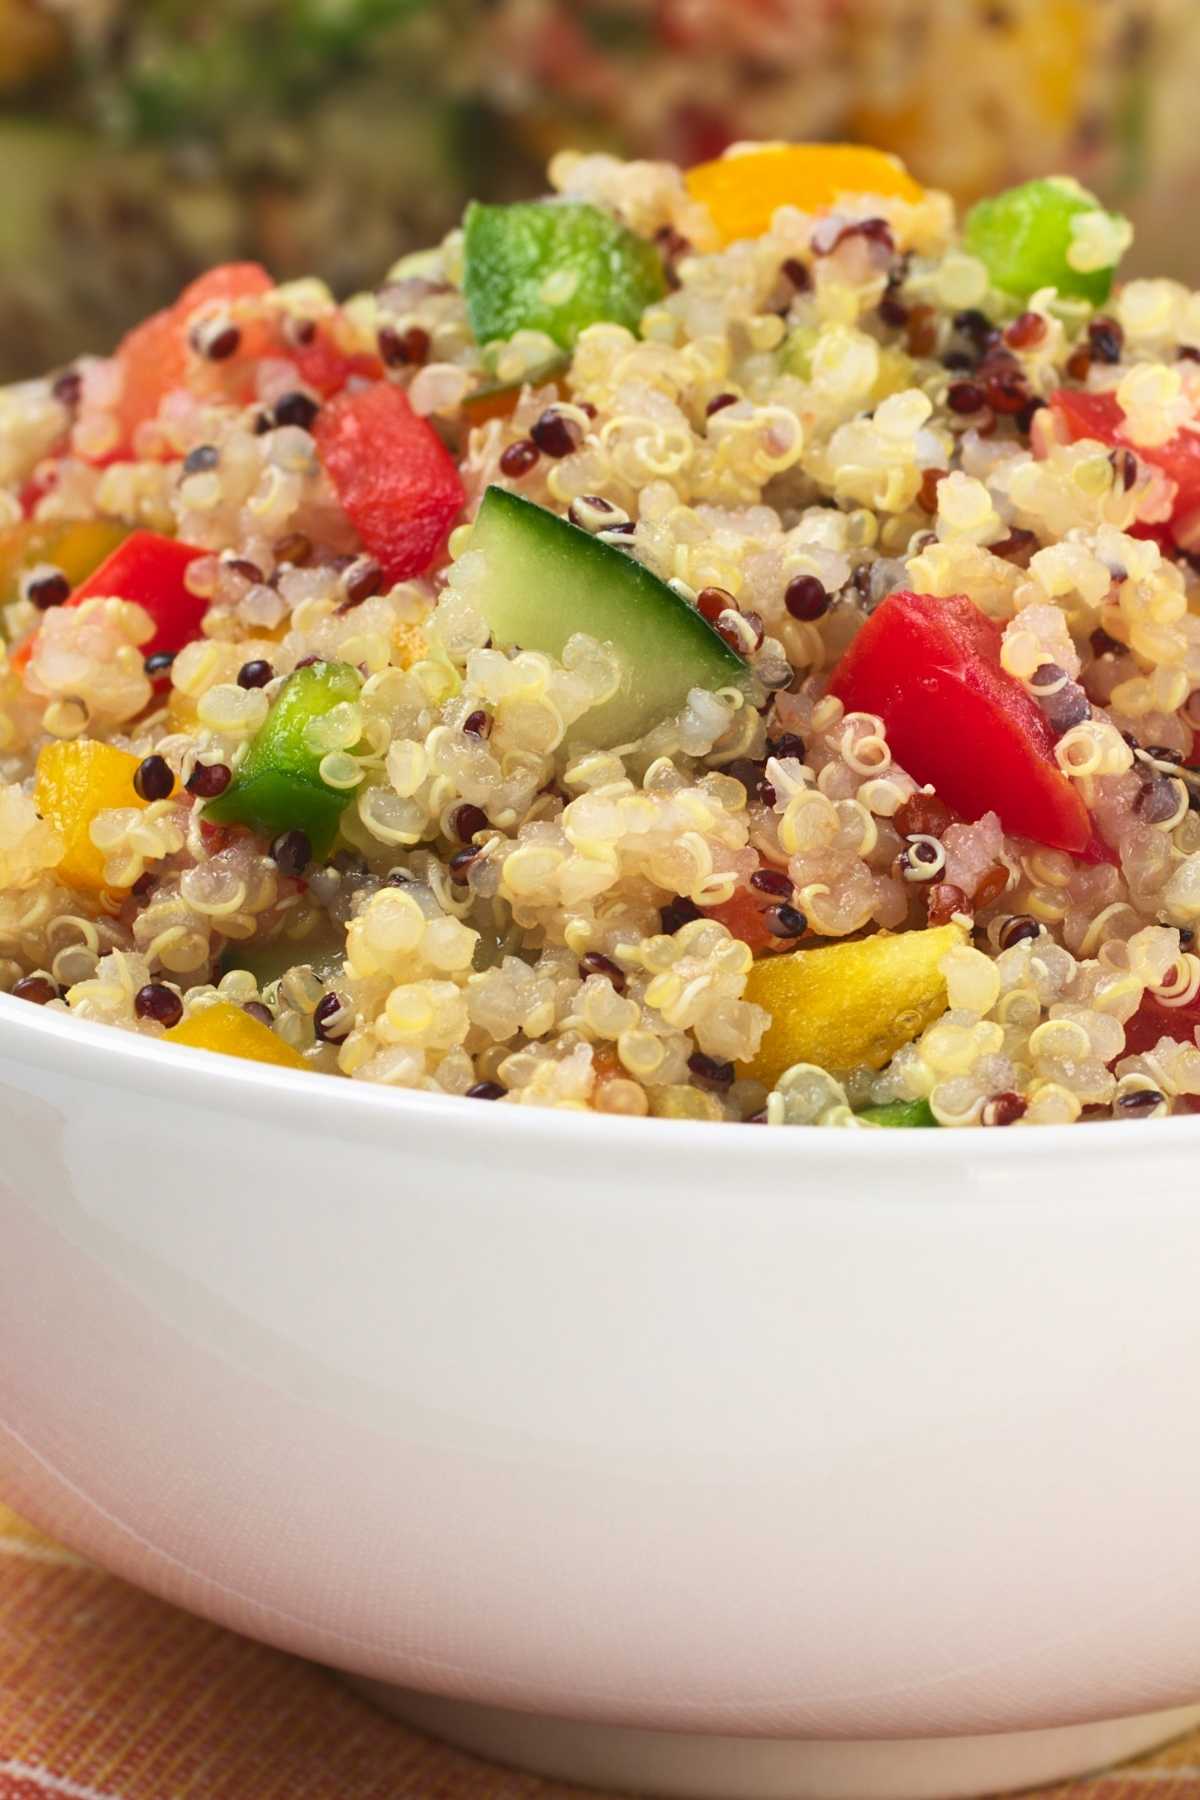 If you love fried rice, give this quinoa fried rice a try! It doesn’t contain any rice but it is full of healthy fiber and delicious flavors.